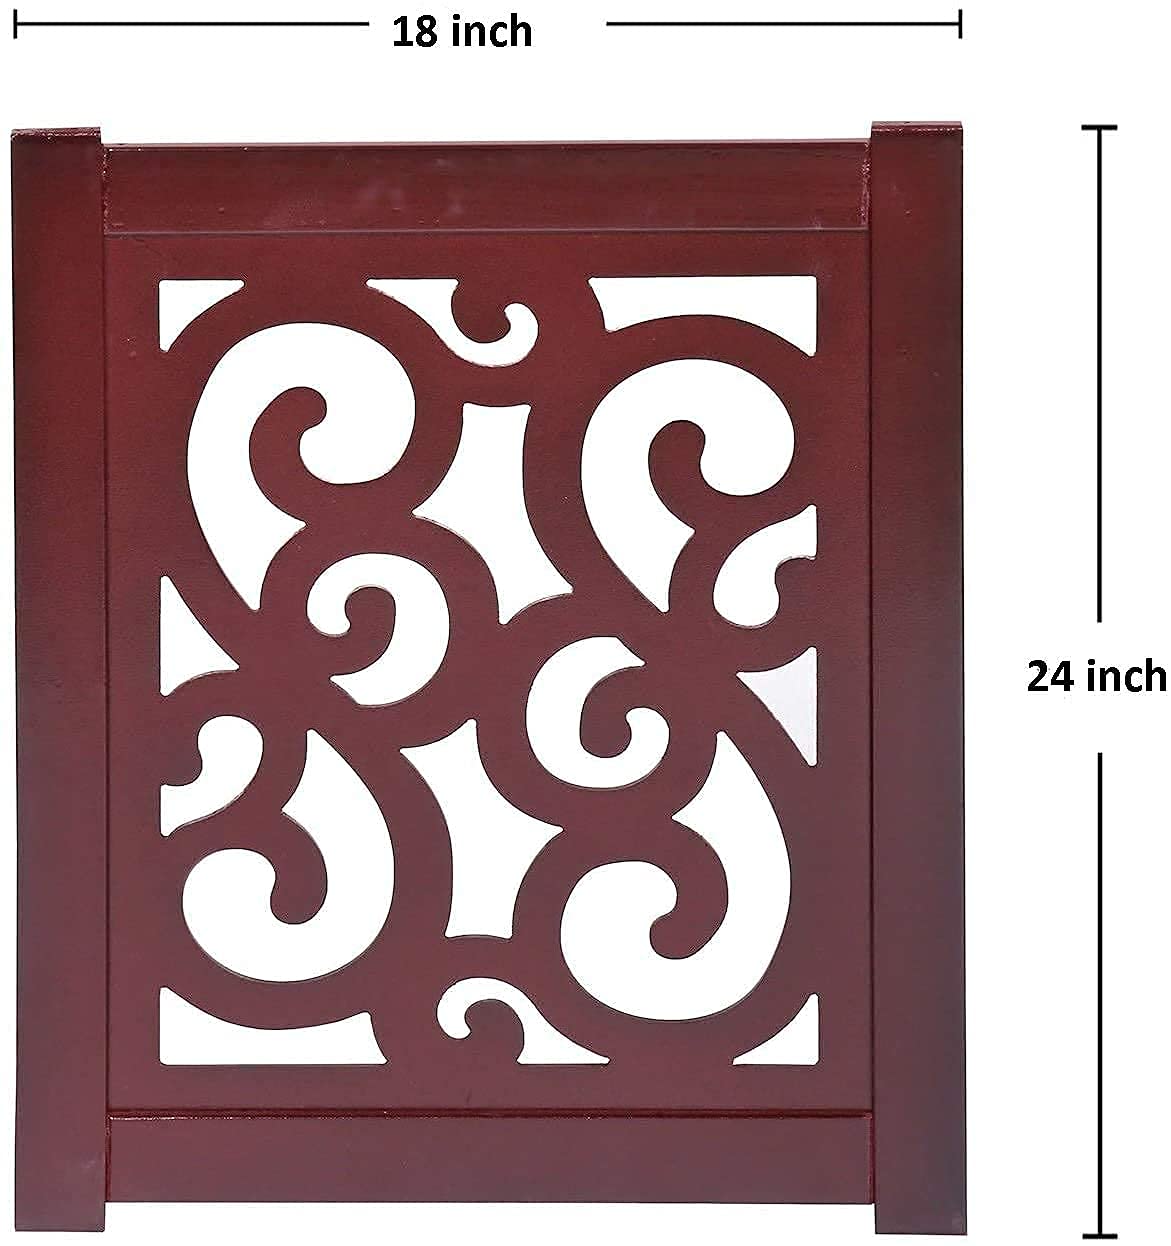 Wooden Pet gate for Safety , Baby Gate for Stairs , Step Over Fence for Stairs , Freestanding Pet Barrier Child Barrier, Gate for Stairs & Door Dime Store